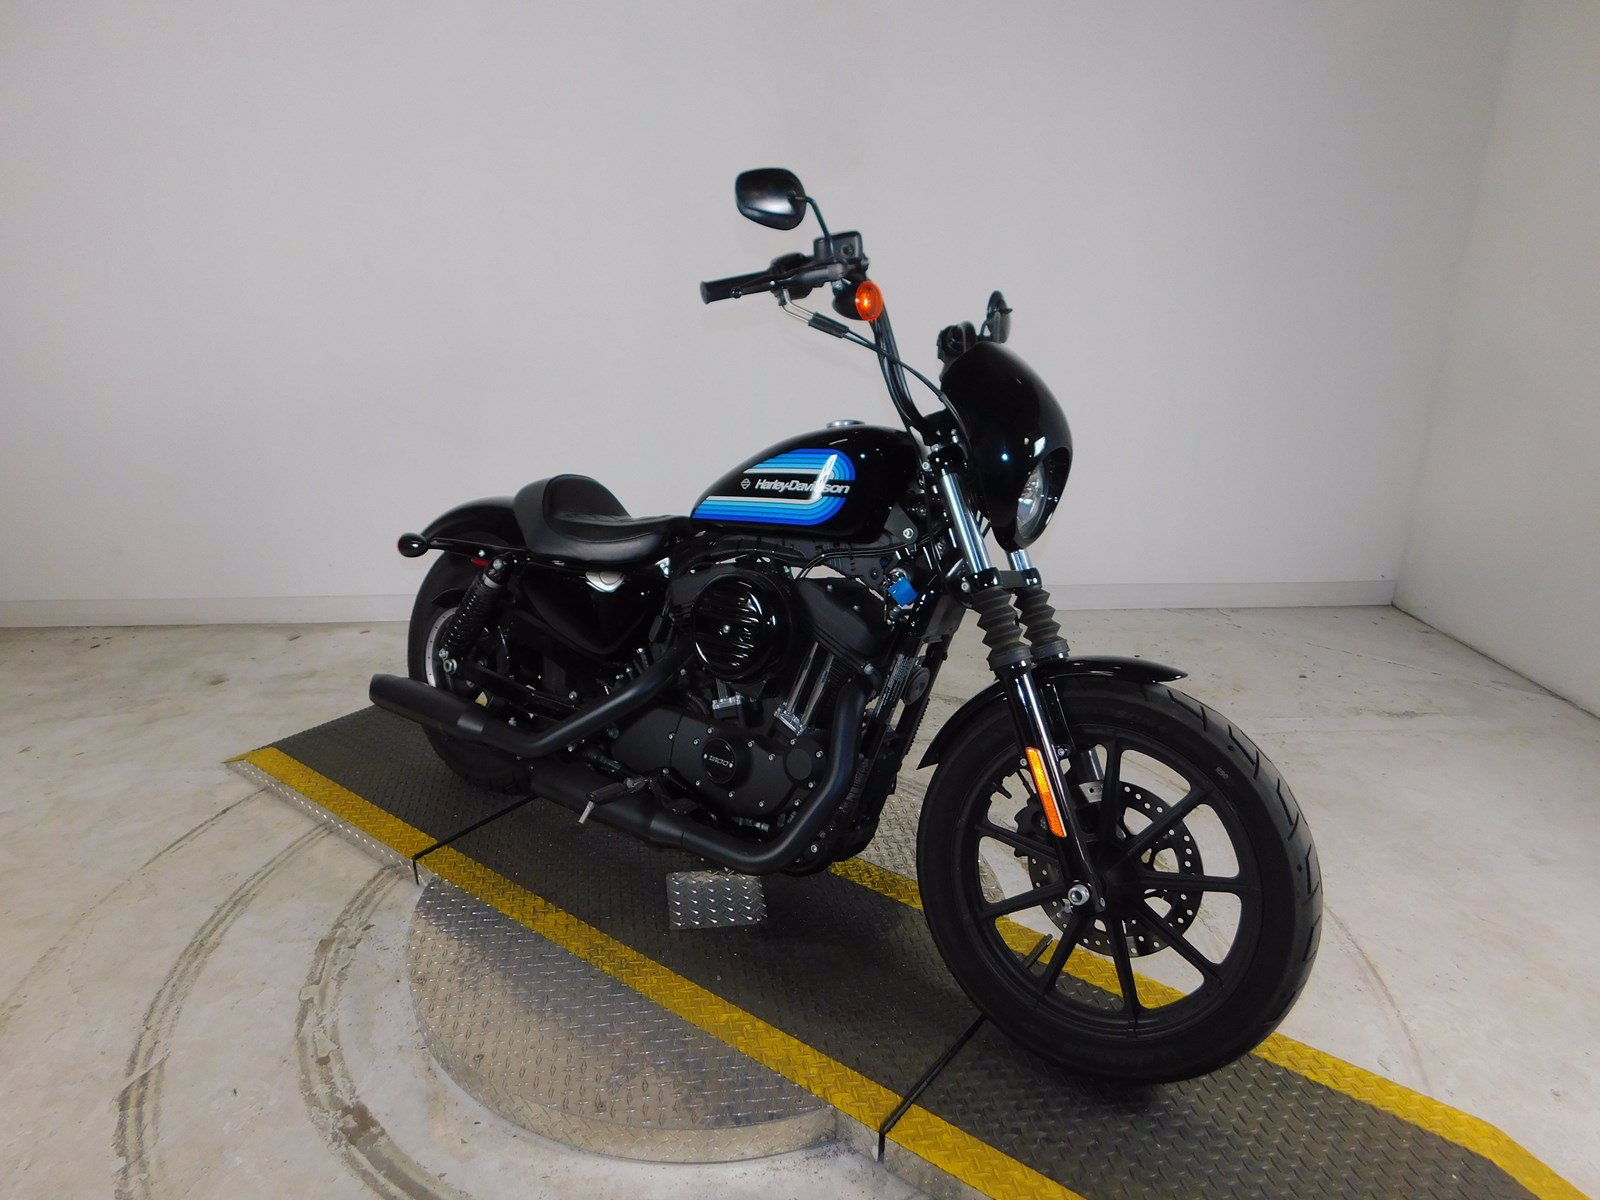 Pre Owned 2018 Harley Davidson Sportster Iron 1200 Xl1200ns Sportster